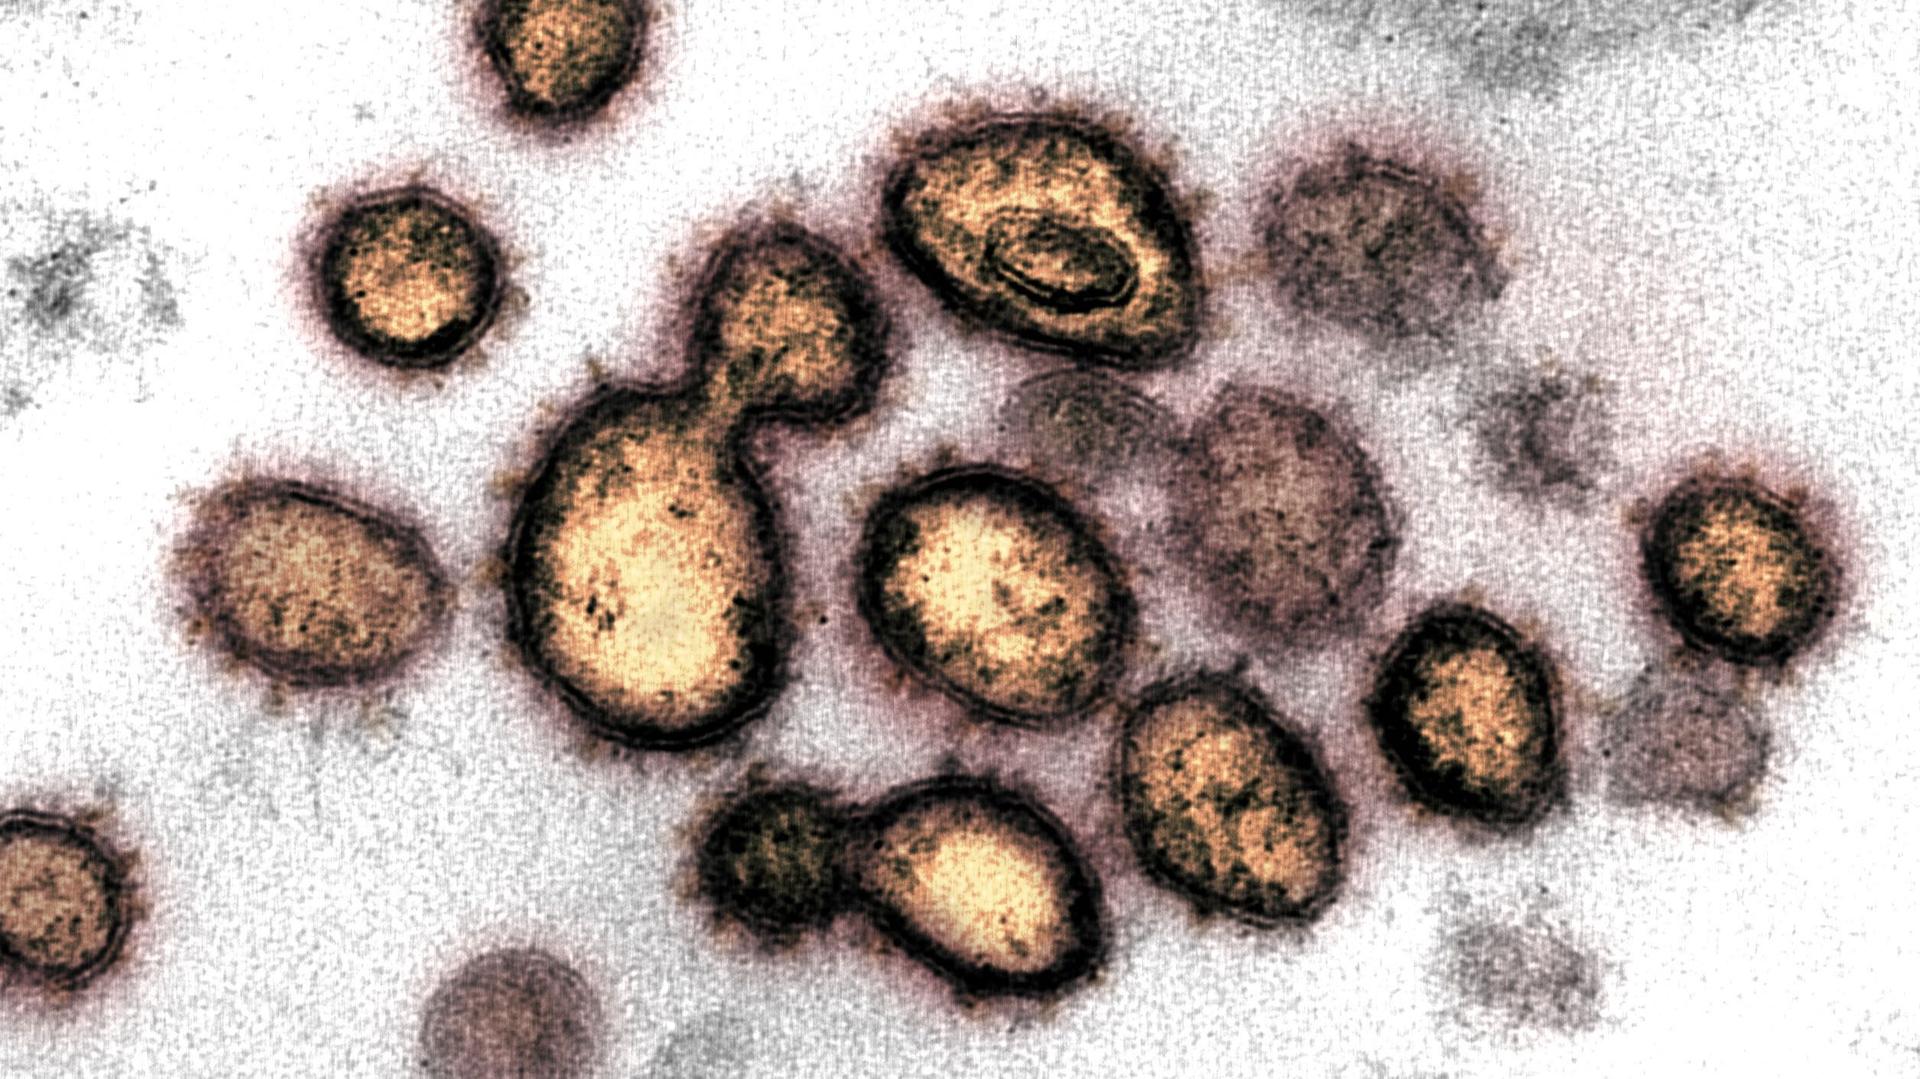 This transmission electron microscope image shows SARS-CoV-2, also known as novel coronavirus, the virus that causes COVID-19, isolated from a patient in the US. Virus particles are shown emerging from the surface of cells cultured in the lab. The spikes 